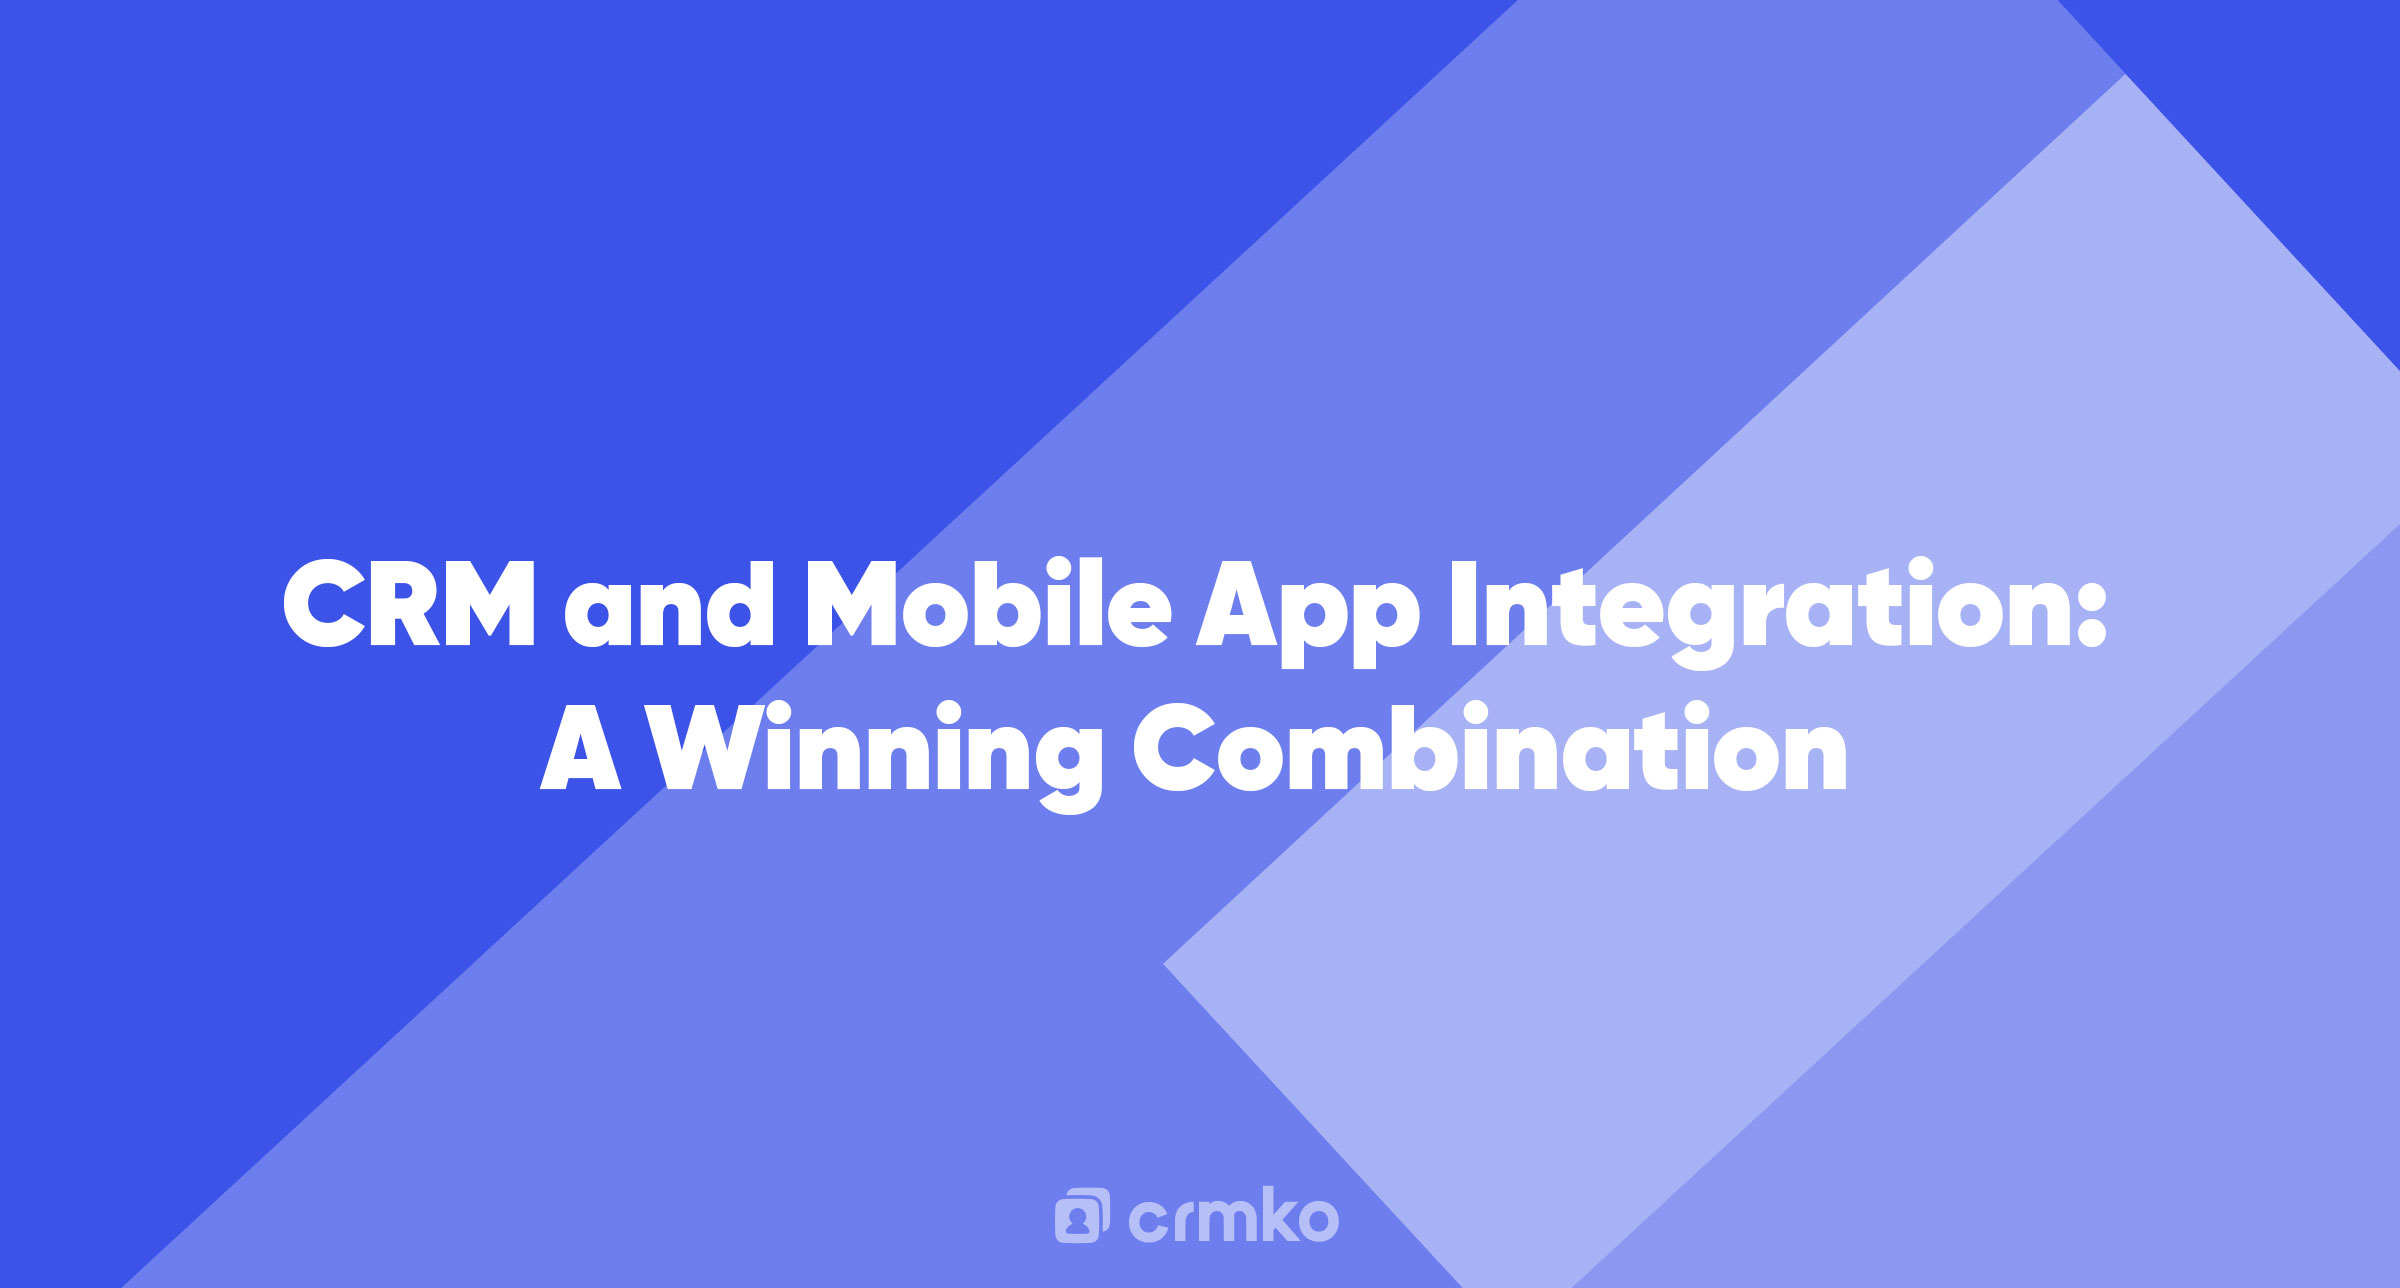 Article | CRM and Mobile App Integration: A Winning Combination